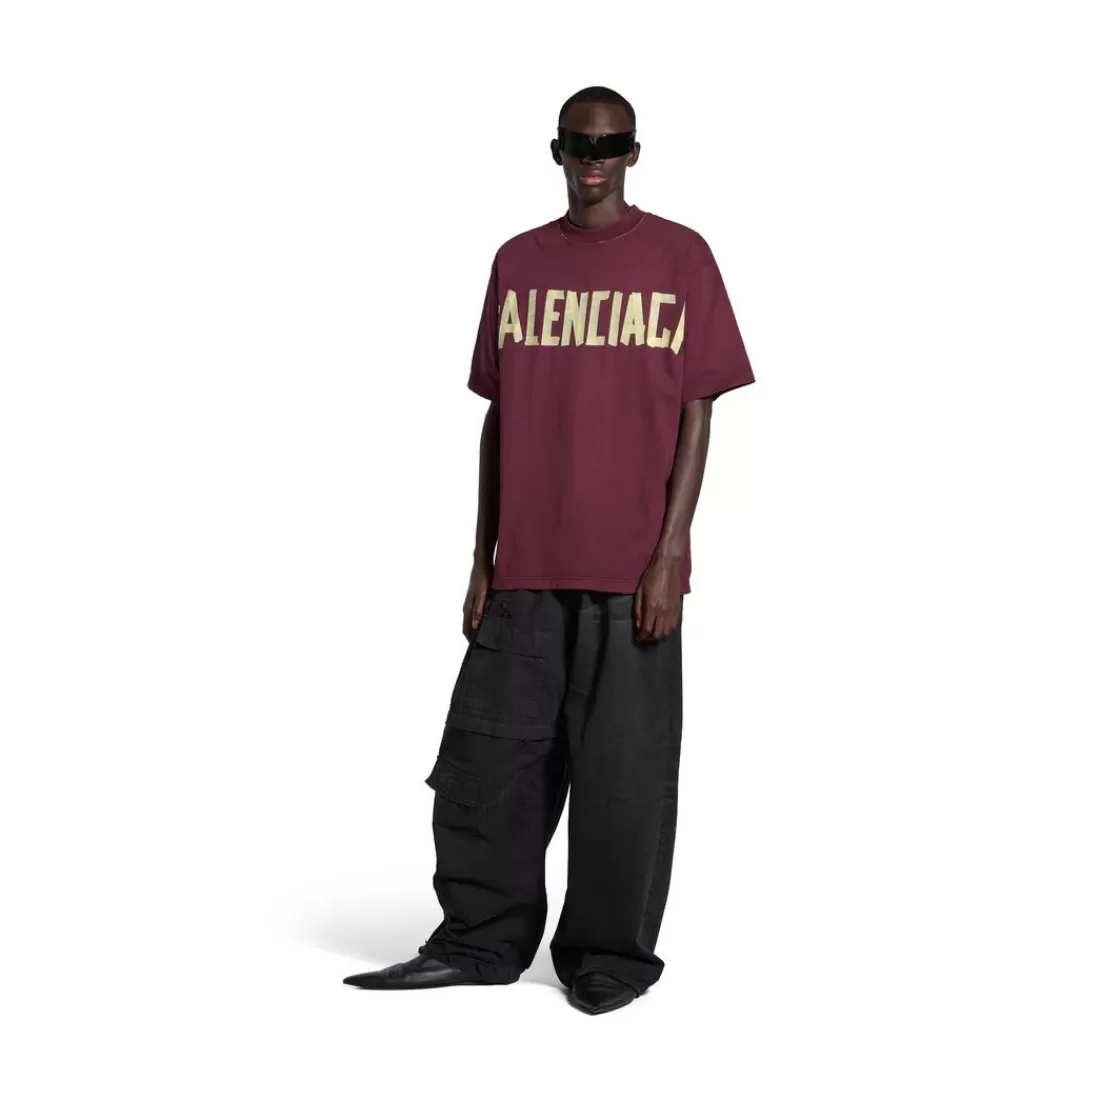 T-SHIRTS | T-SHIRTS>Balenciaga T-shirt Tape Type Medium Fit in Rosso Scuro